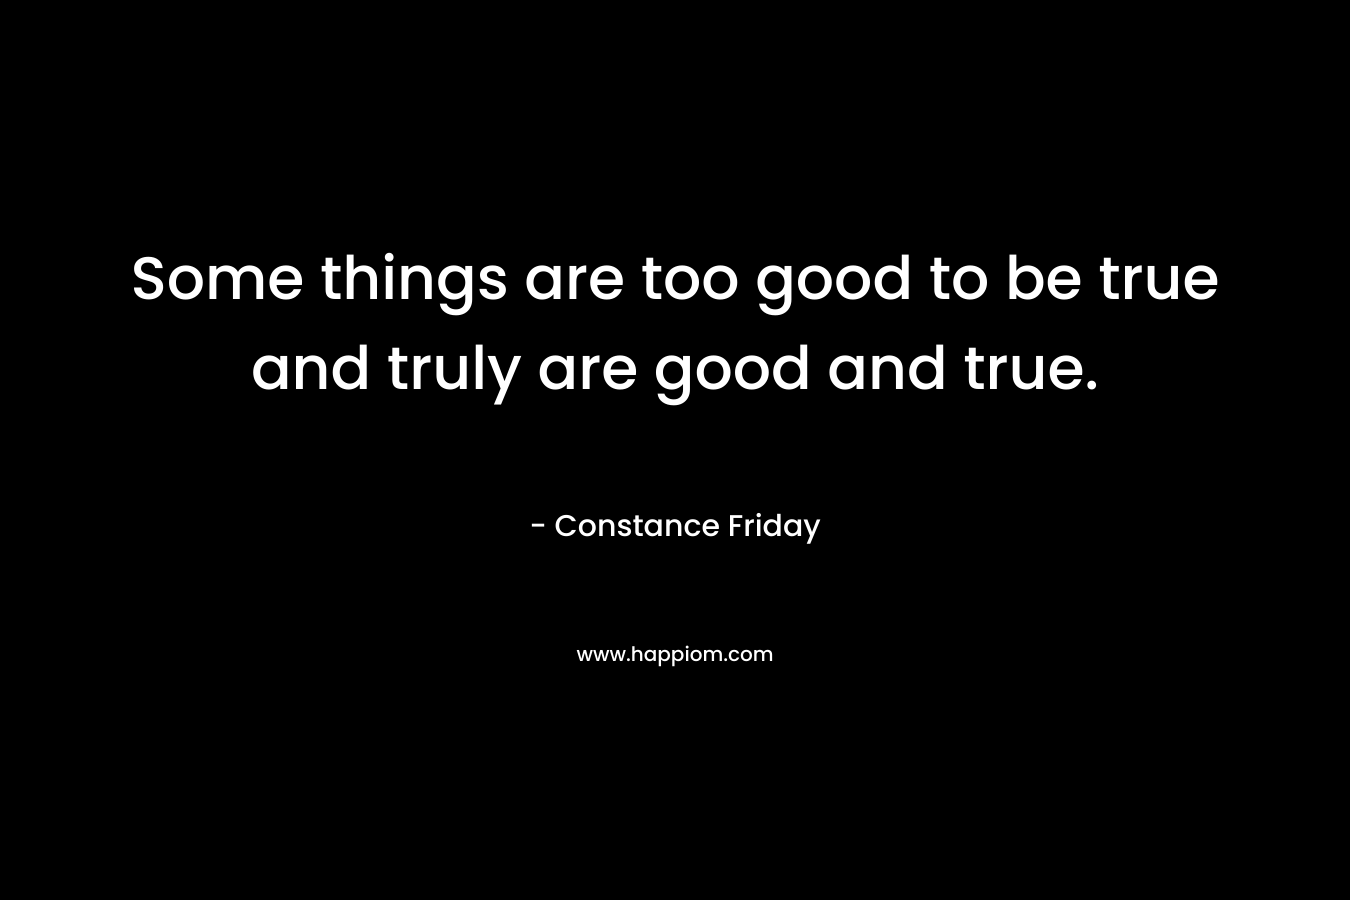 Some things are too good to be true and truly are good and true.